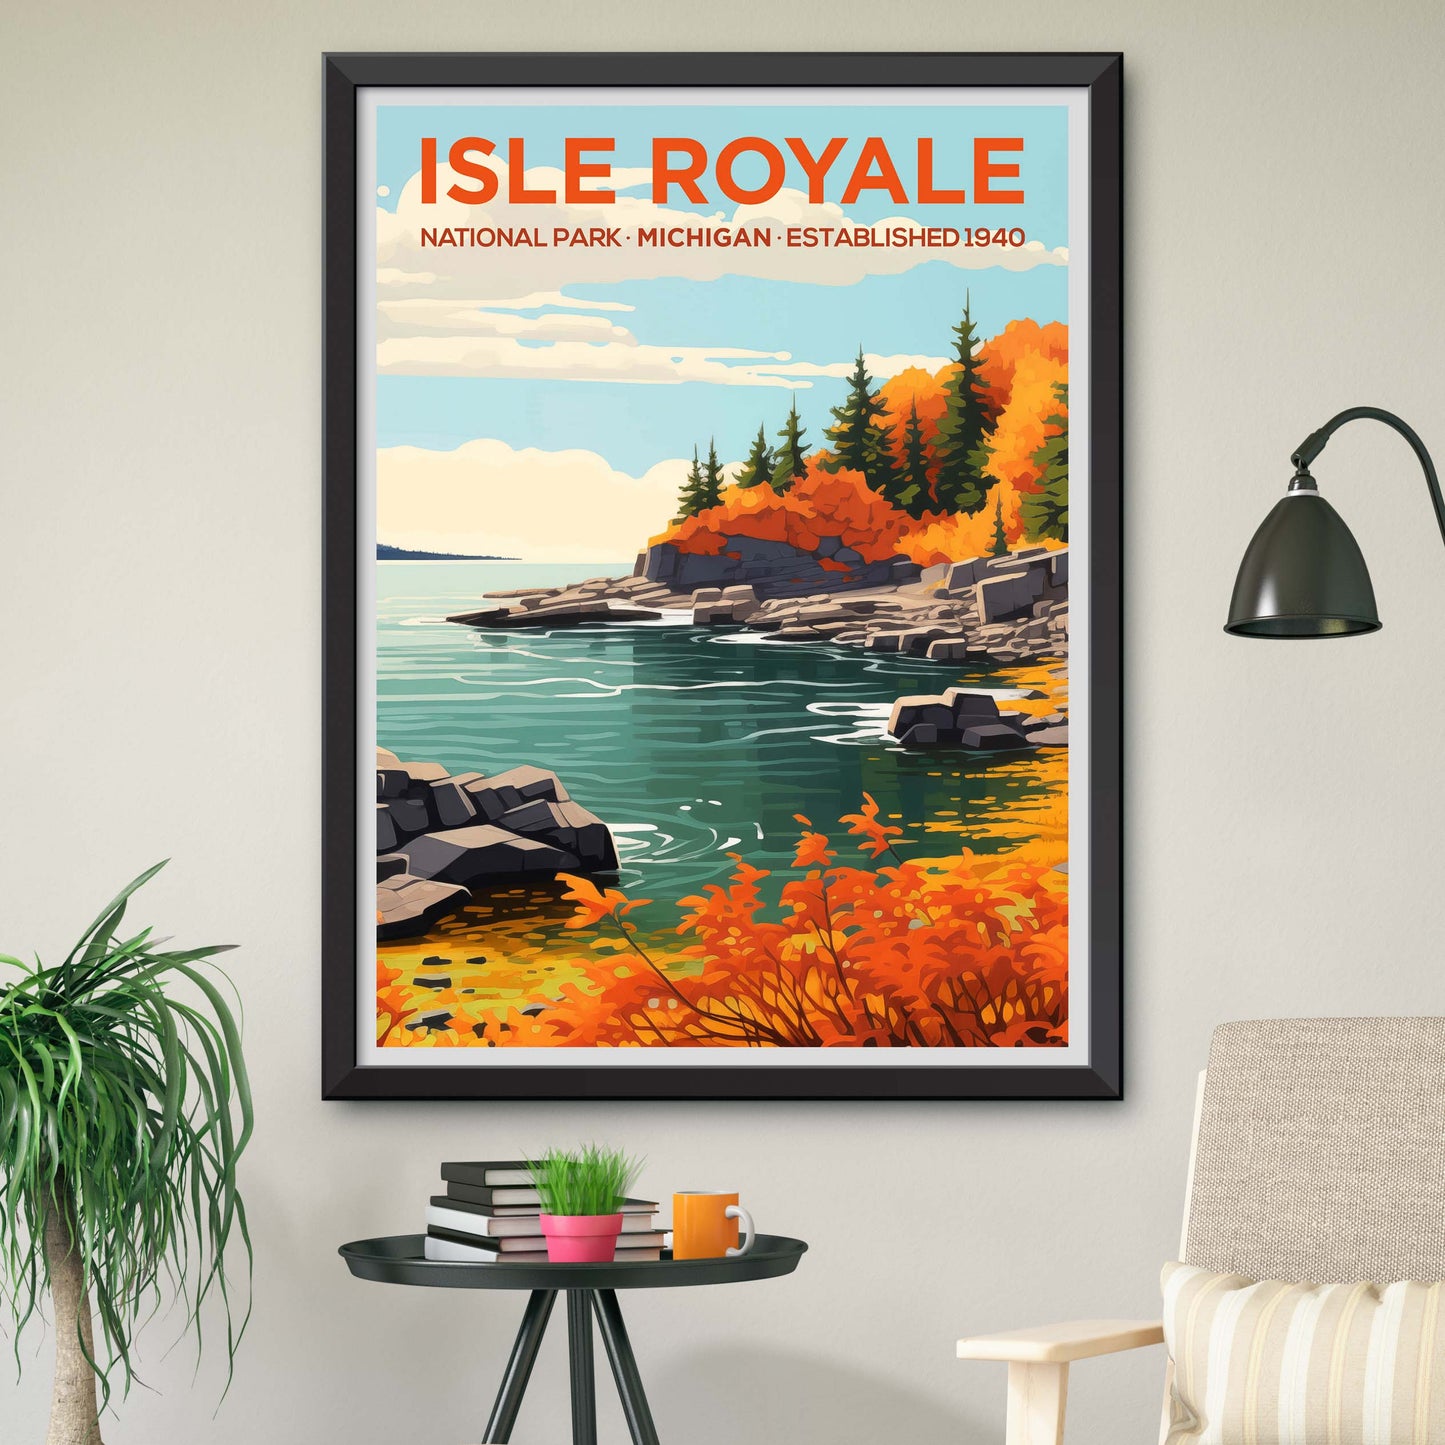 Isle Royale National Park Travel Poster with Vibrant Colors